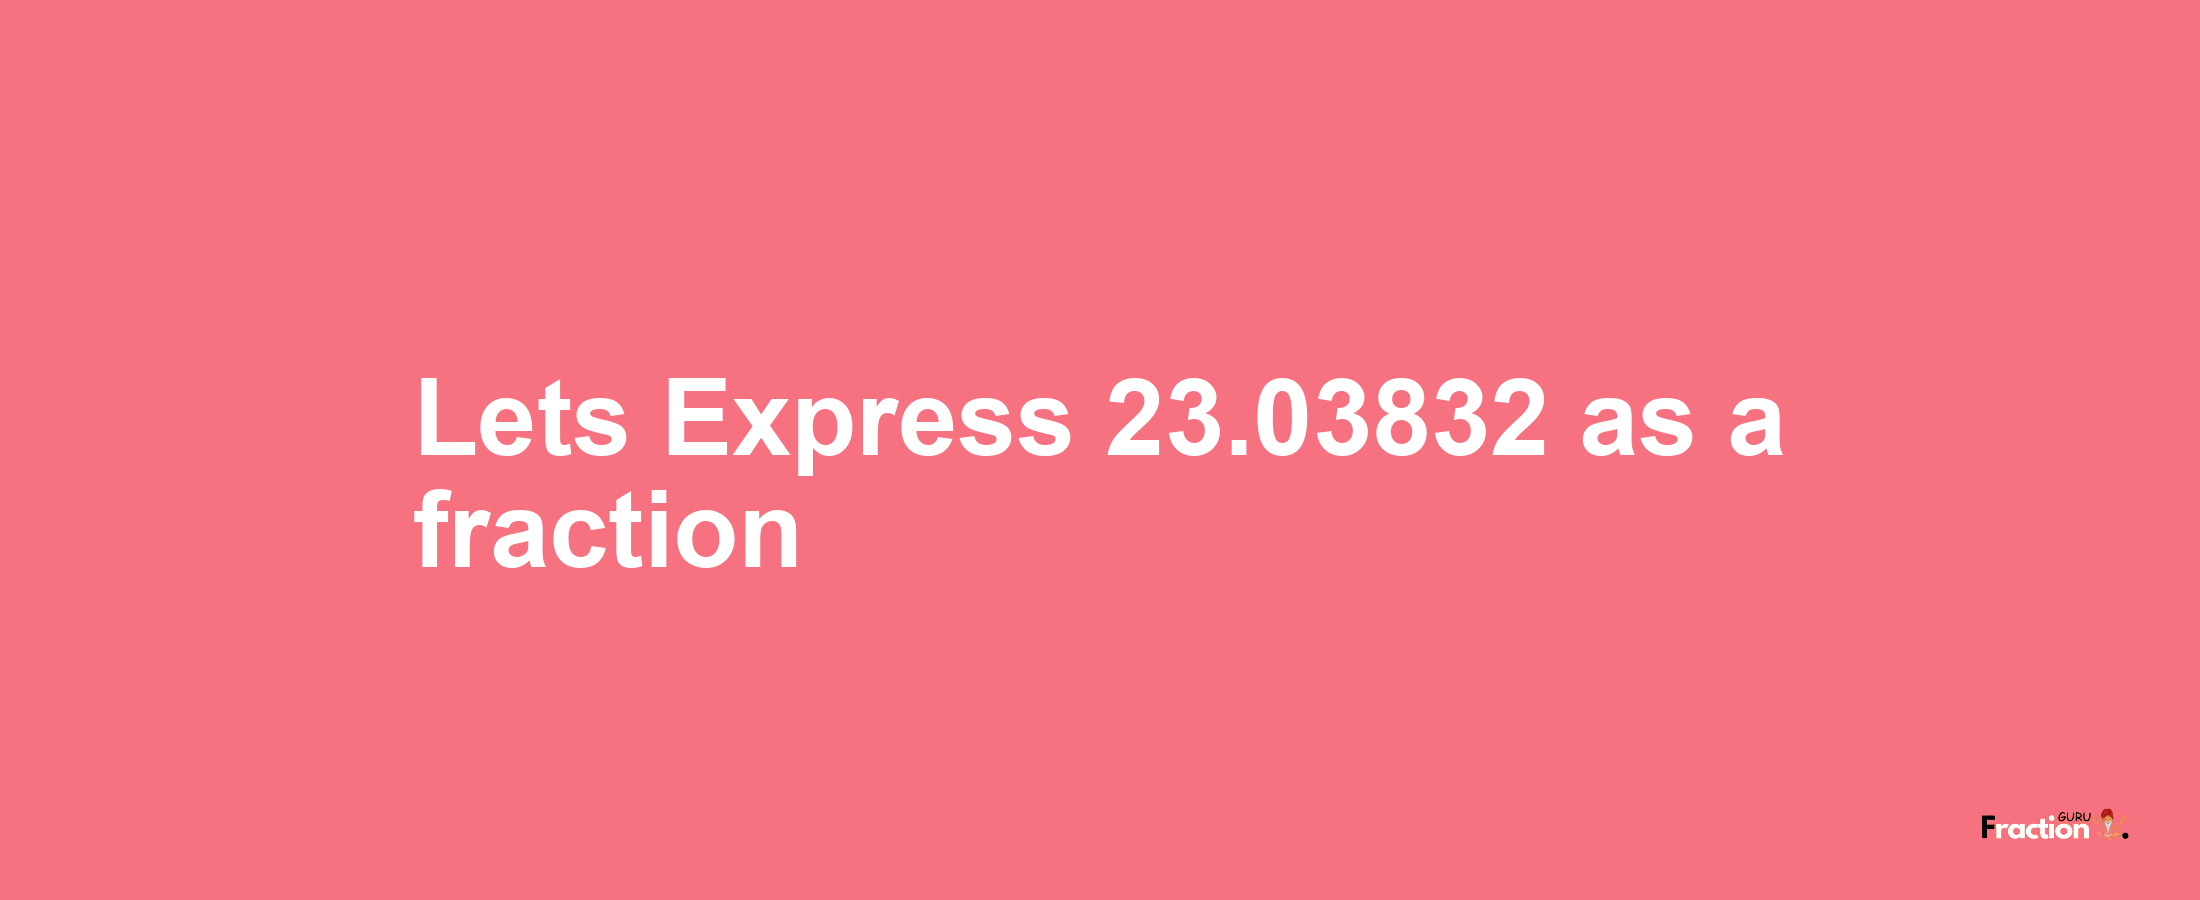 Lets Express 23.03832 as afraction